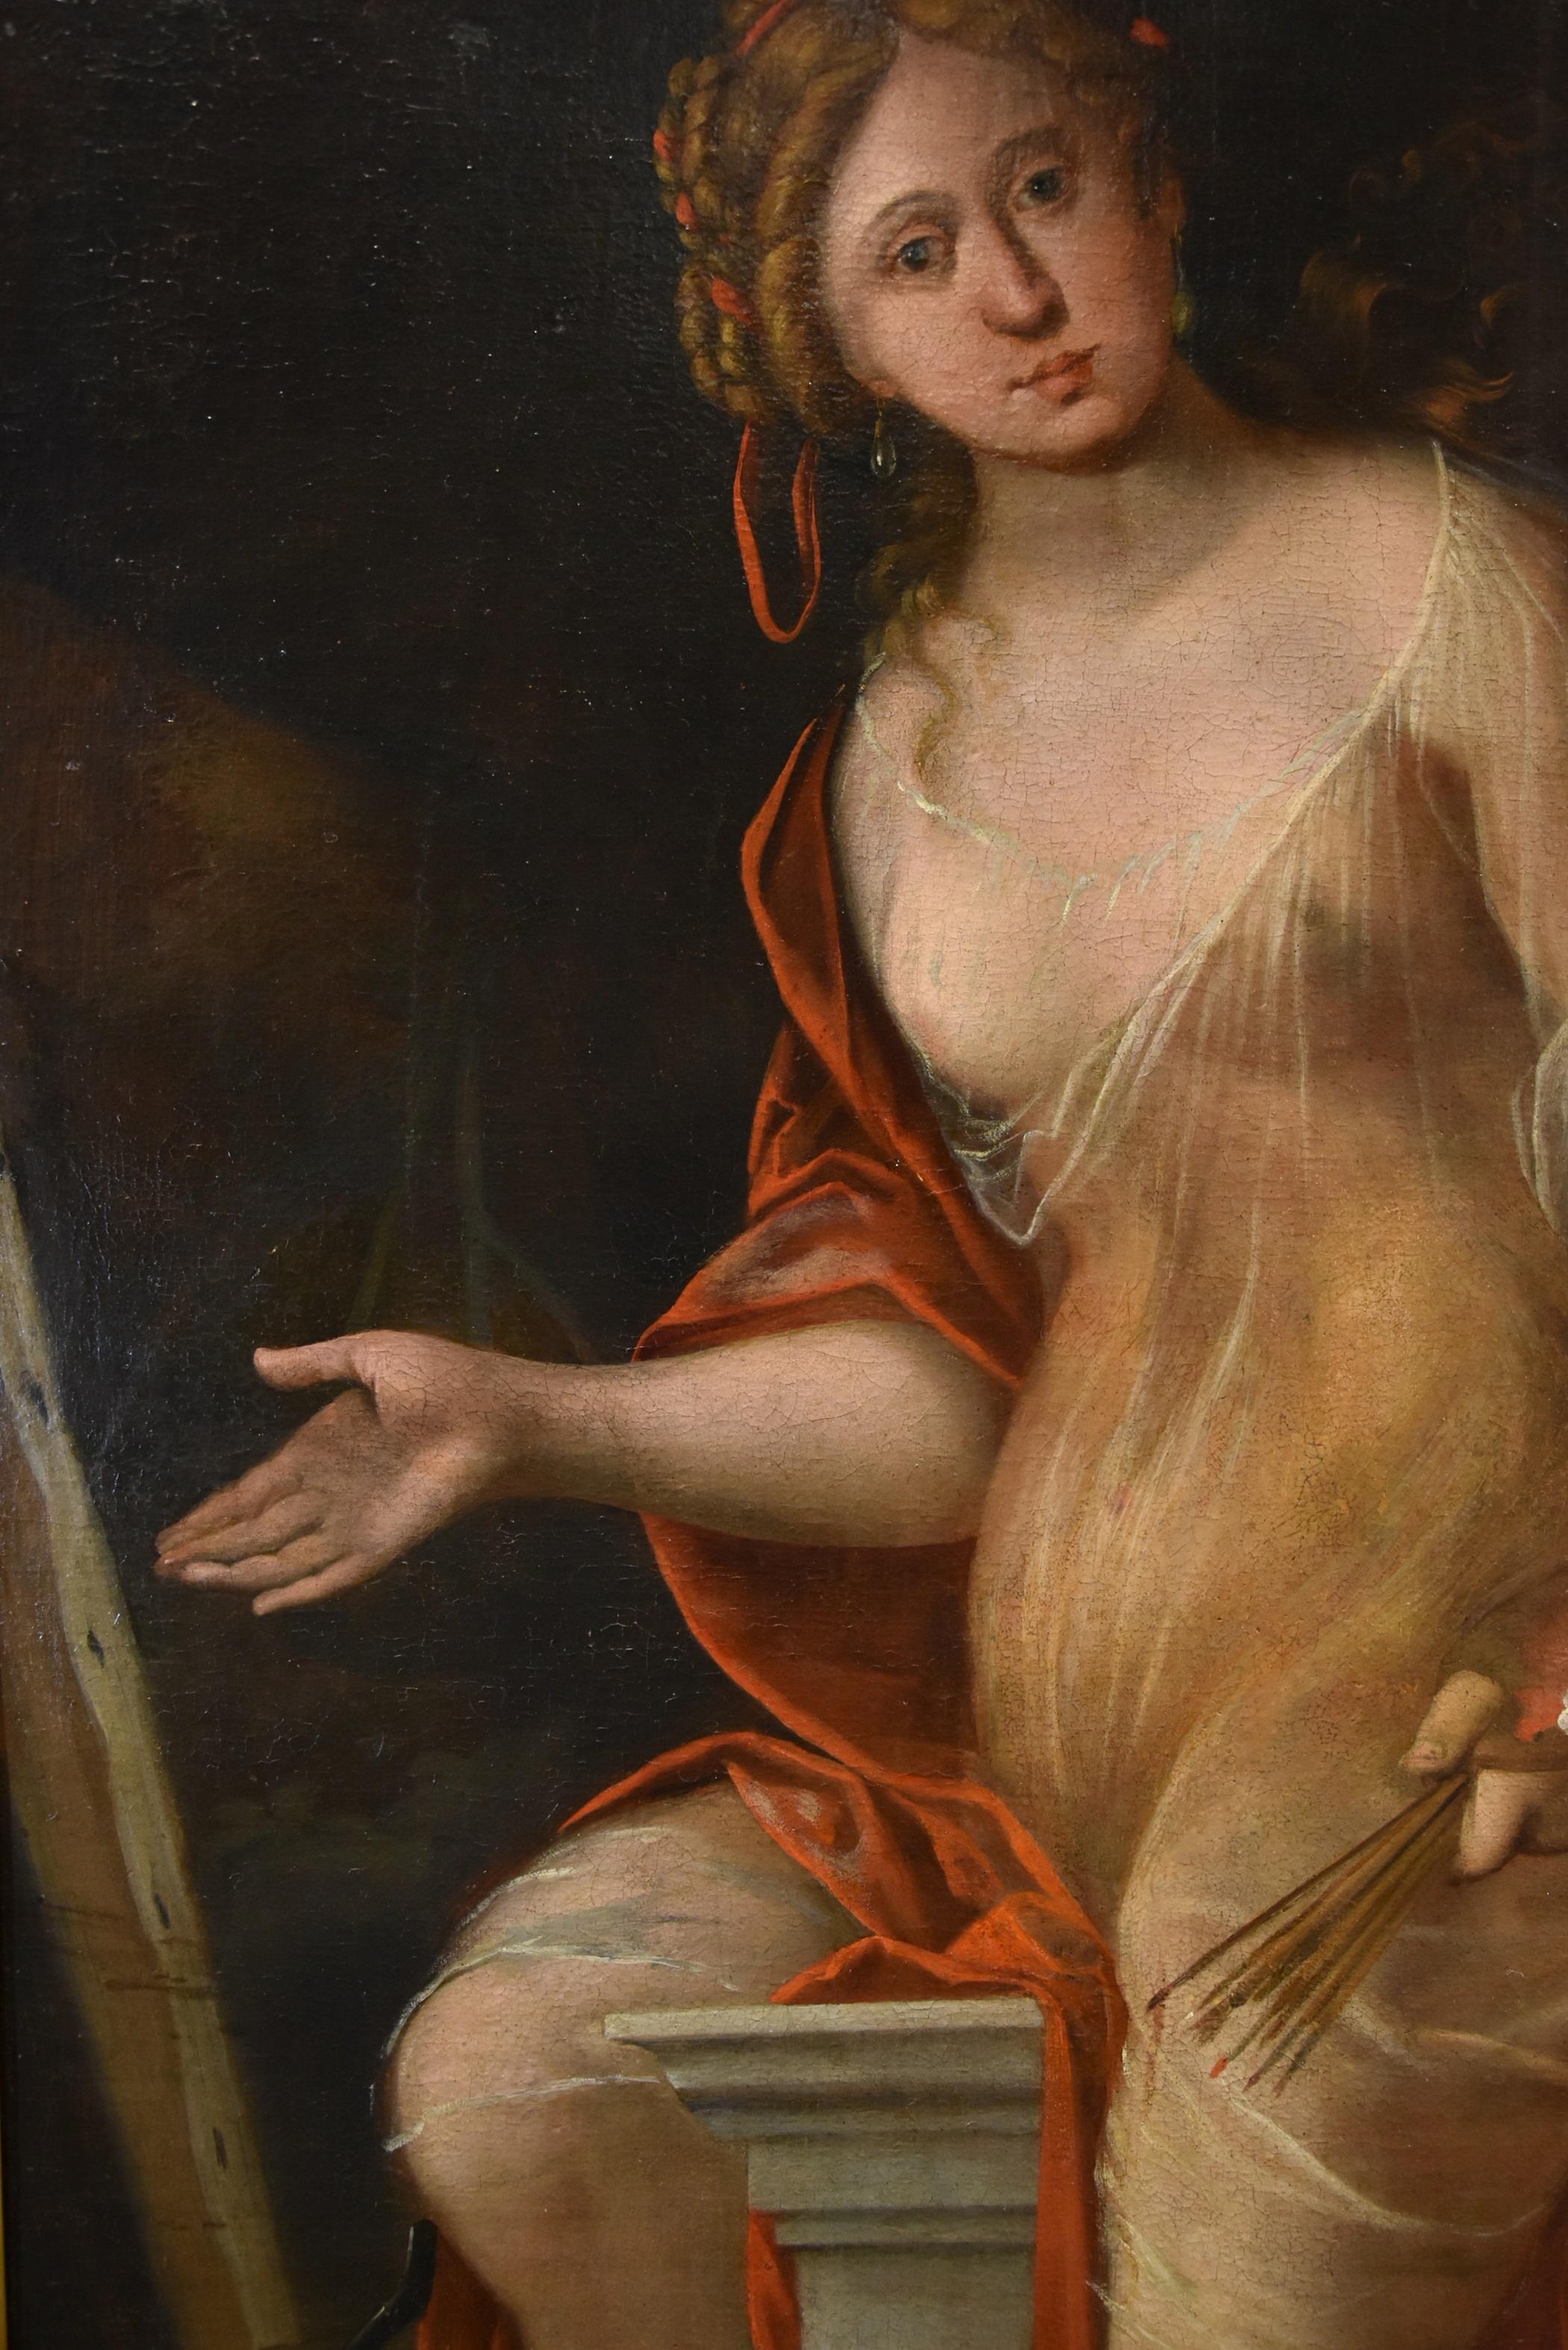 Terwesten Woman Allegory Art Paint Oil on canvas 17/18th Century Old master  For Sale 7